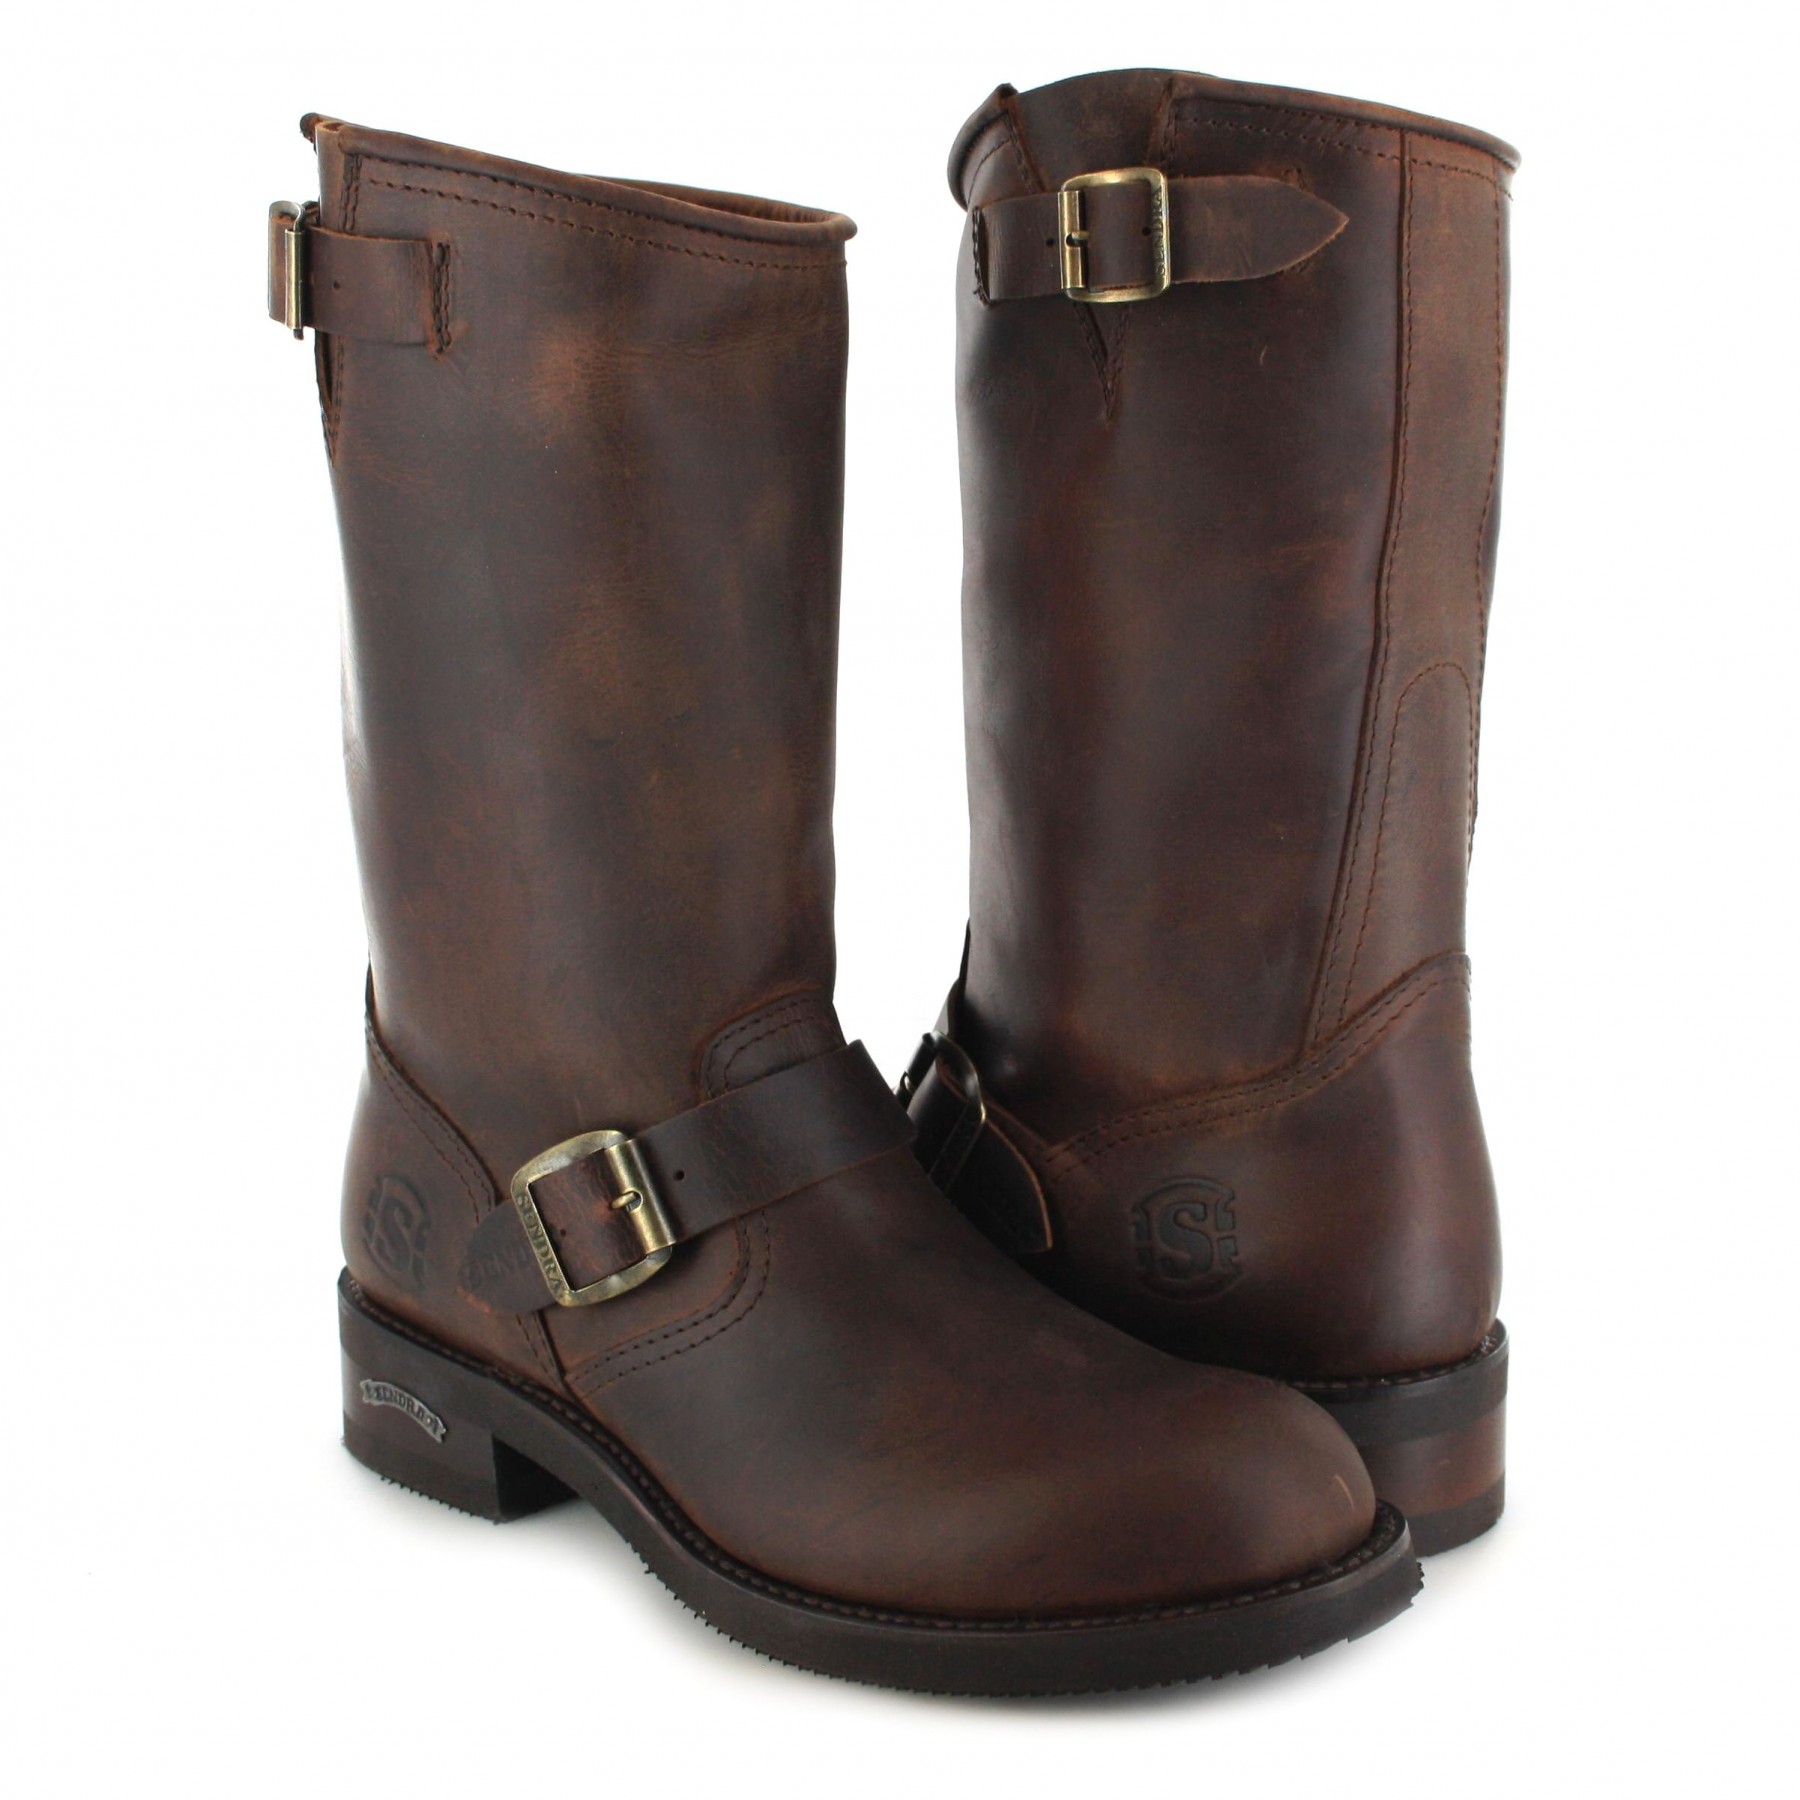 ... sendra boots 2944 sprinter engineer boot with no steel toecap- brown - rquxaid